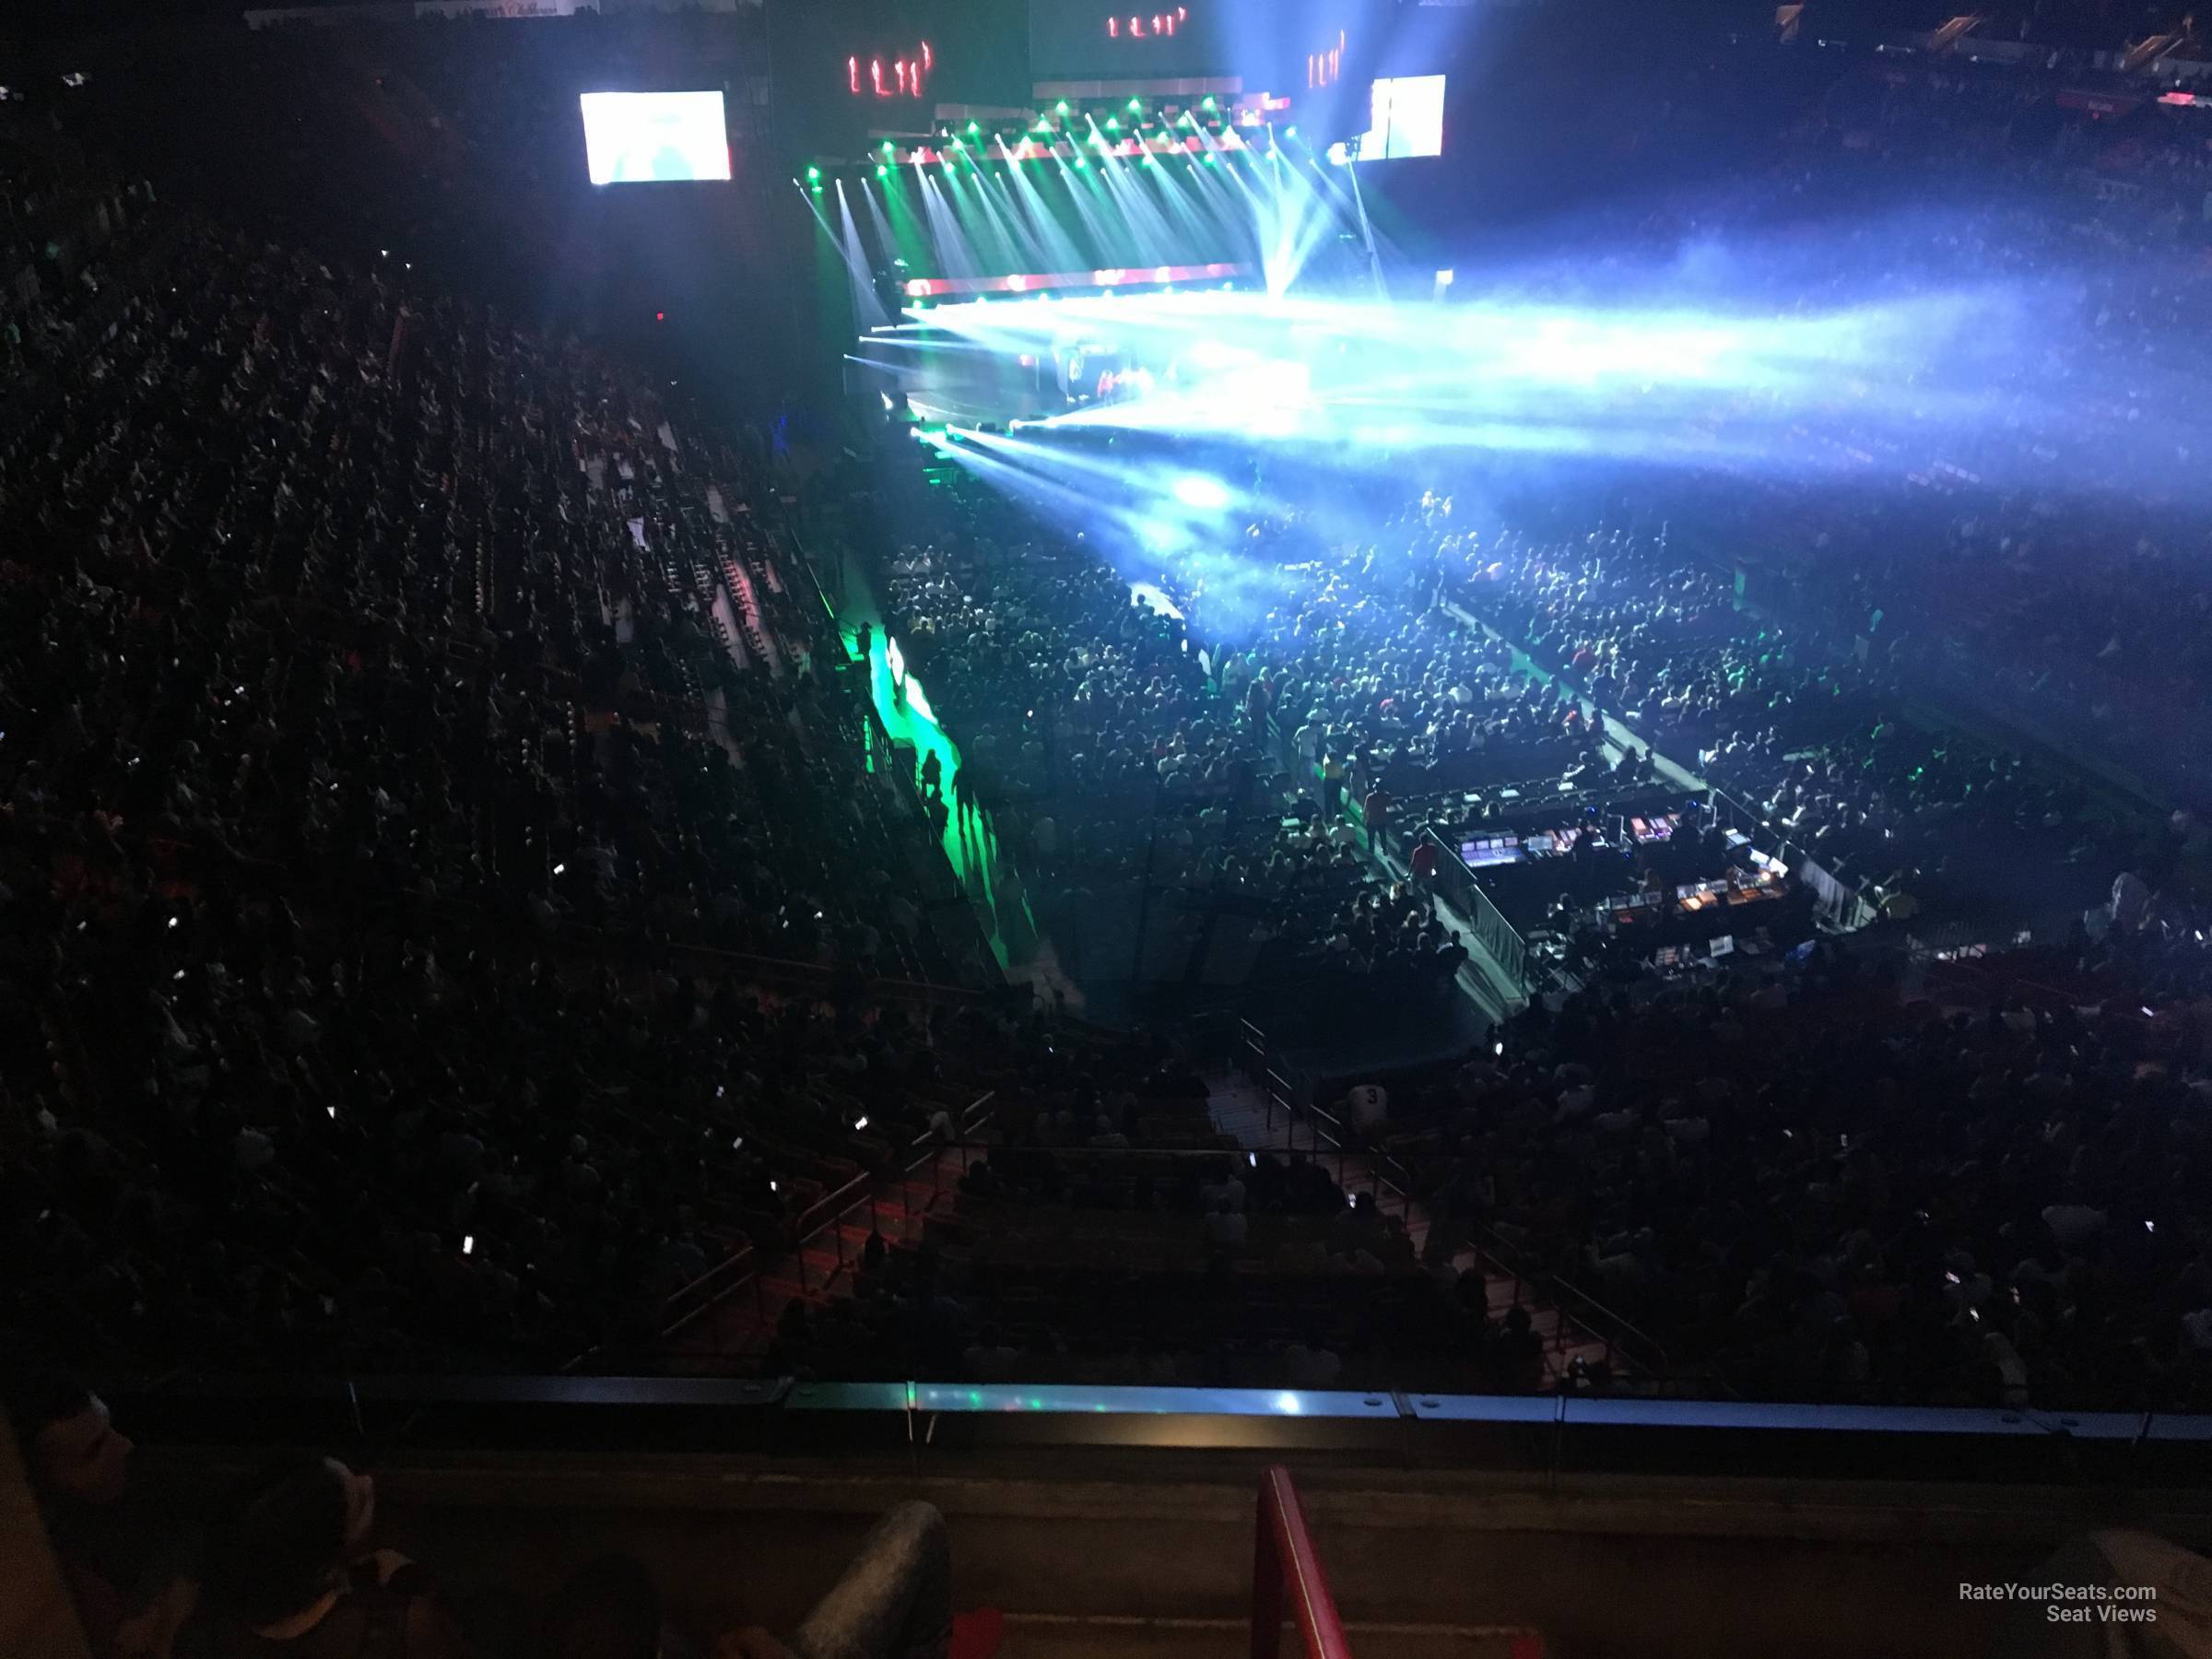 section 318, row 3 seat view  for concert - ftx arena